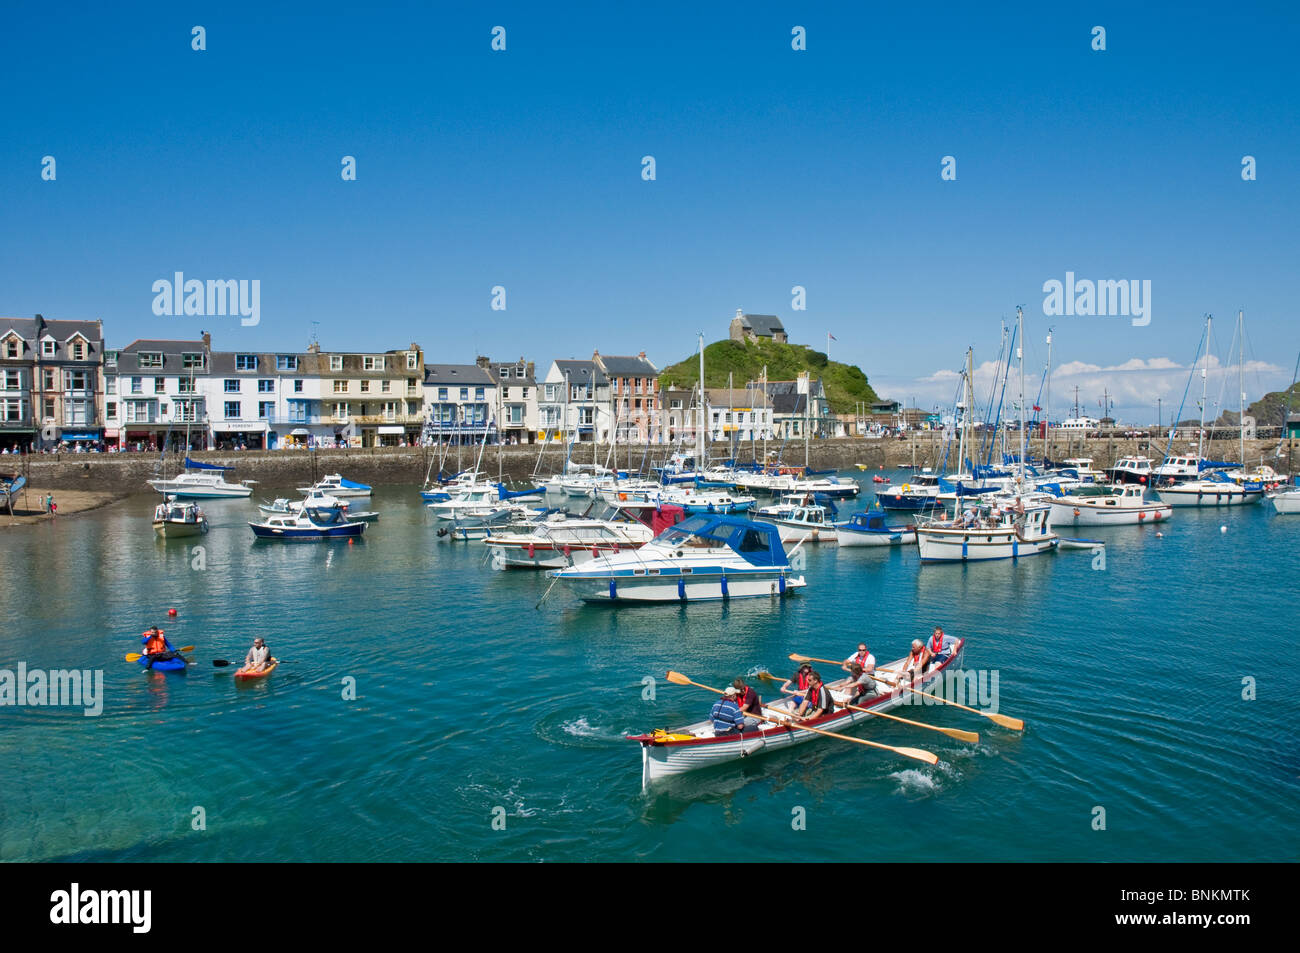 Boats & yachts iin th harbour at Ilfracombe  Devon England Stock Photo